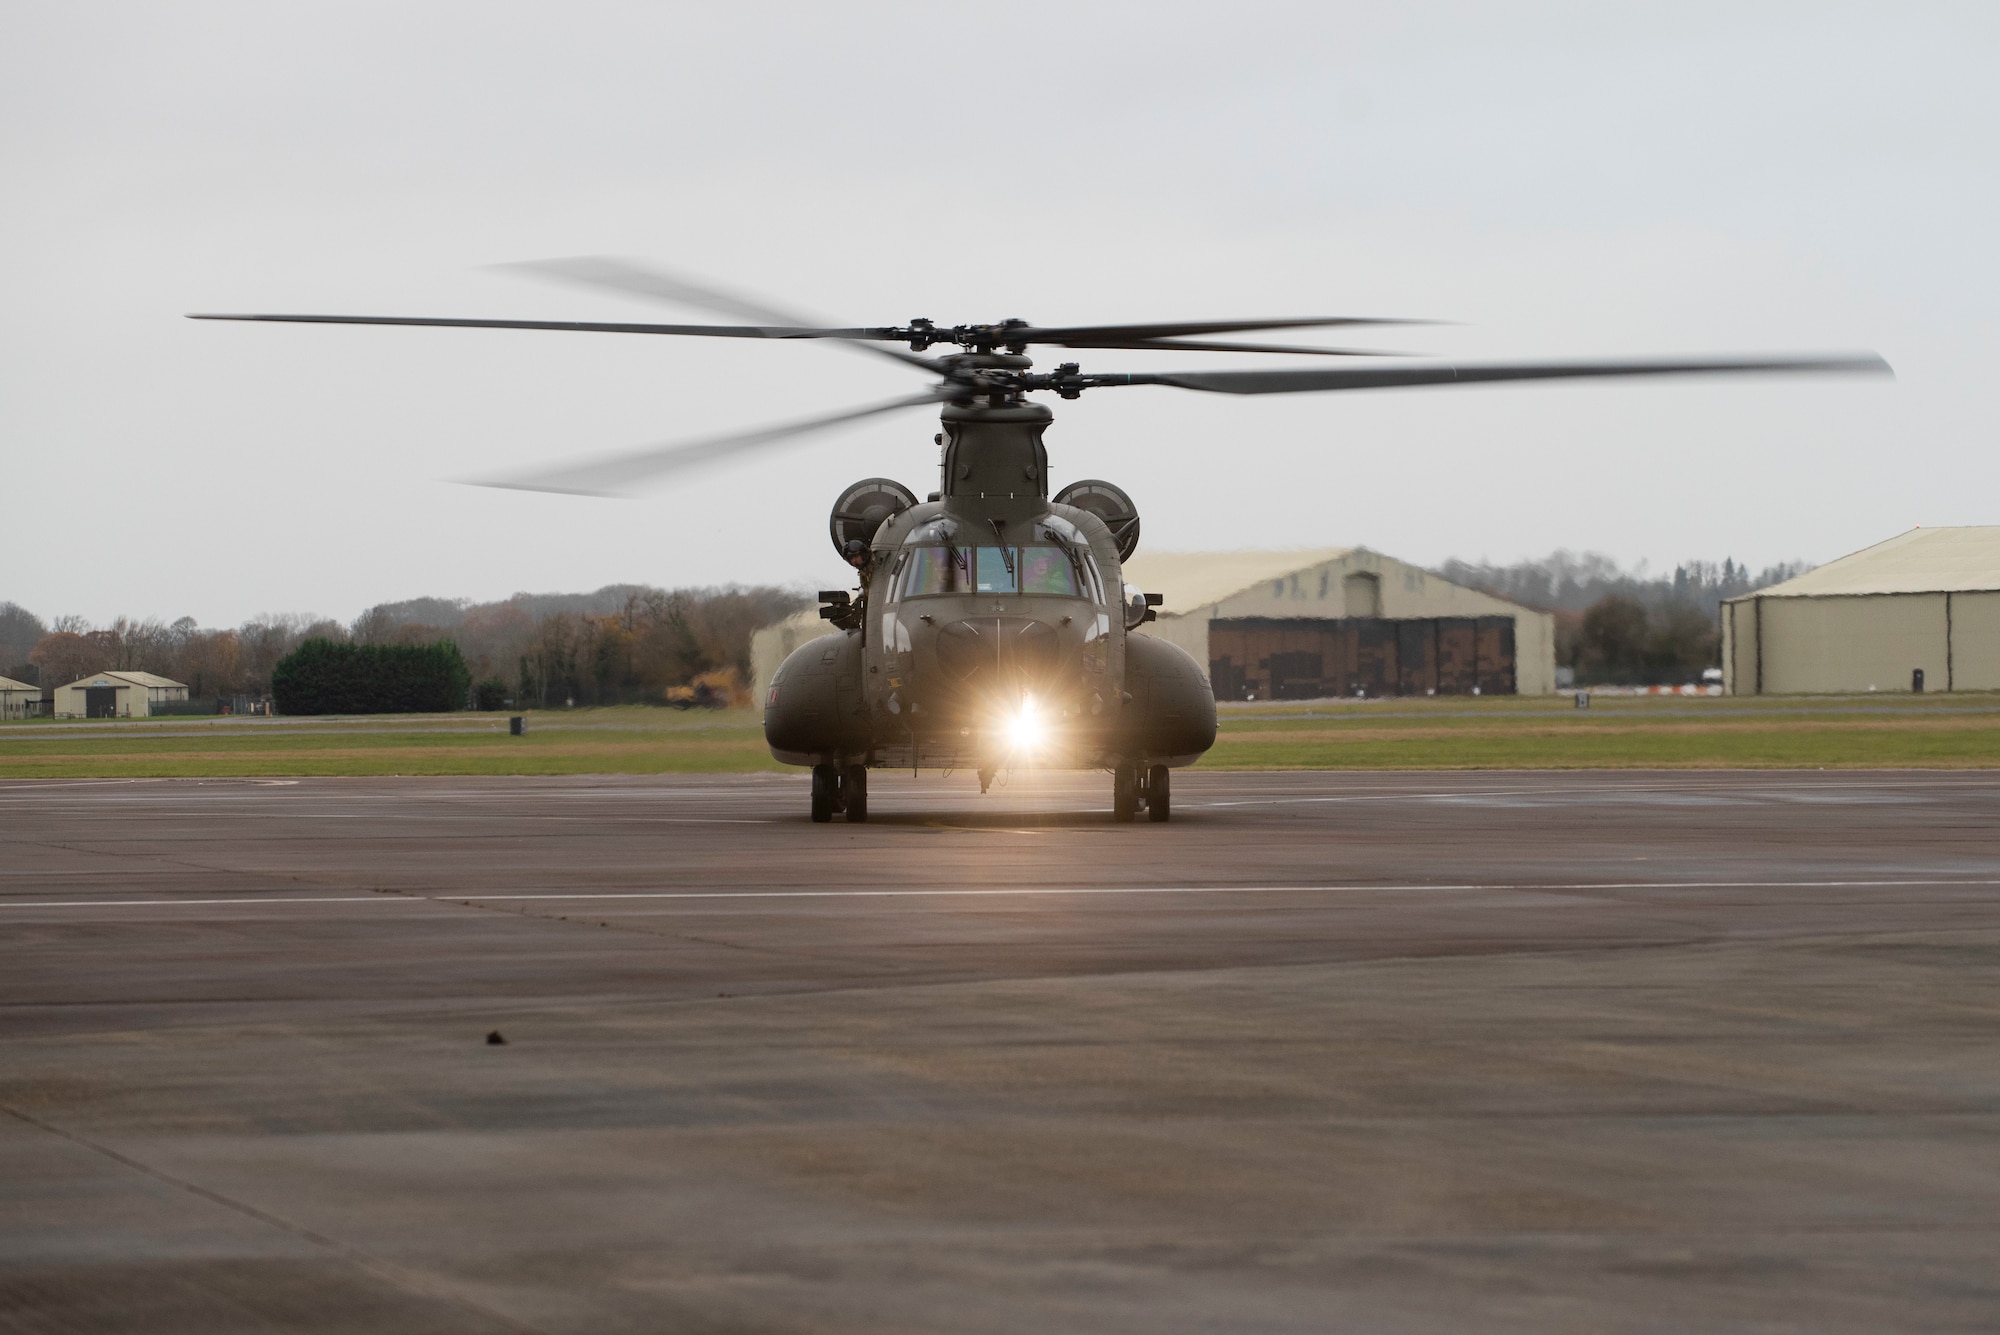 A Royal Air Force CH-47 Chinook helicopter arrives at RAF Fairford, England, Nov. 17, 2020, in support of NATO Exercise Loyal Leda 2020 (LOLE20). Allied Land Command (LANDCOM) conducted a combat readiness evaluation on the NATO Headquarters Allied Rapid Reaction Corp (ARRC) during LOLE20, which took place at RAF Fairford and South Cerney, England, Nov. 9-19, 2020. This was a complex multi-domain exercise designed to test the war-fighting capabilities of the ARRC in a COVID-19 environment including combat operations. LOLE20 was a key NATO exercise to validate and certify the Gloucester-based ARRC as a NATO war-fighting corps at full operational readiness, capable of commanding up to 120,000 multinational troops across a full spectrum of military operations. (U.S. Air Force photo by Senior Airman Jennifer Zima)